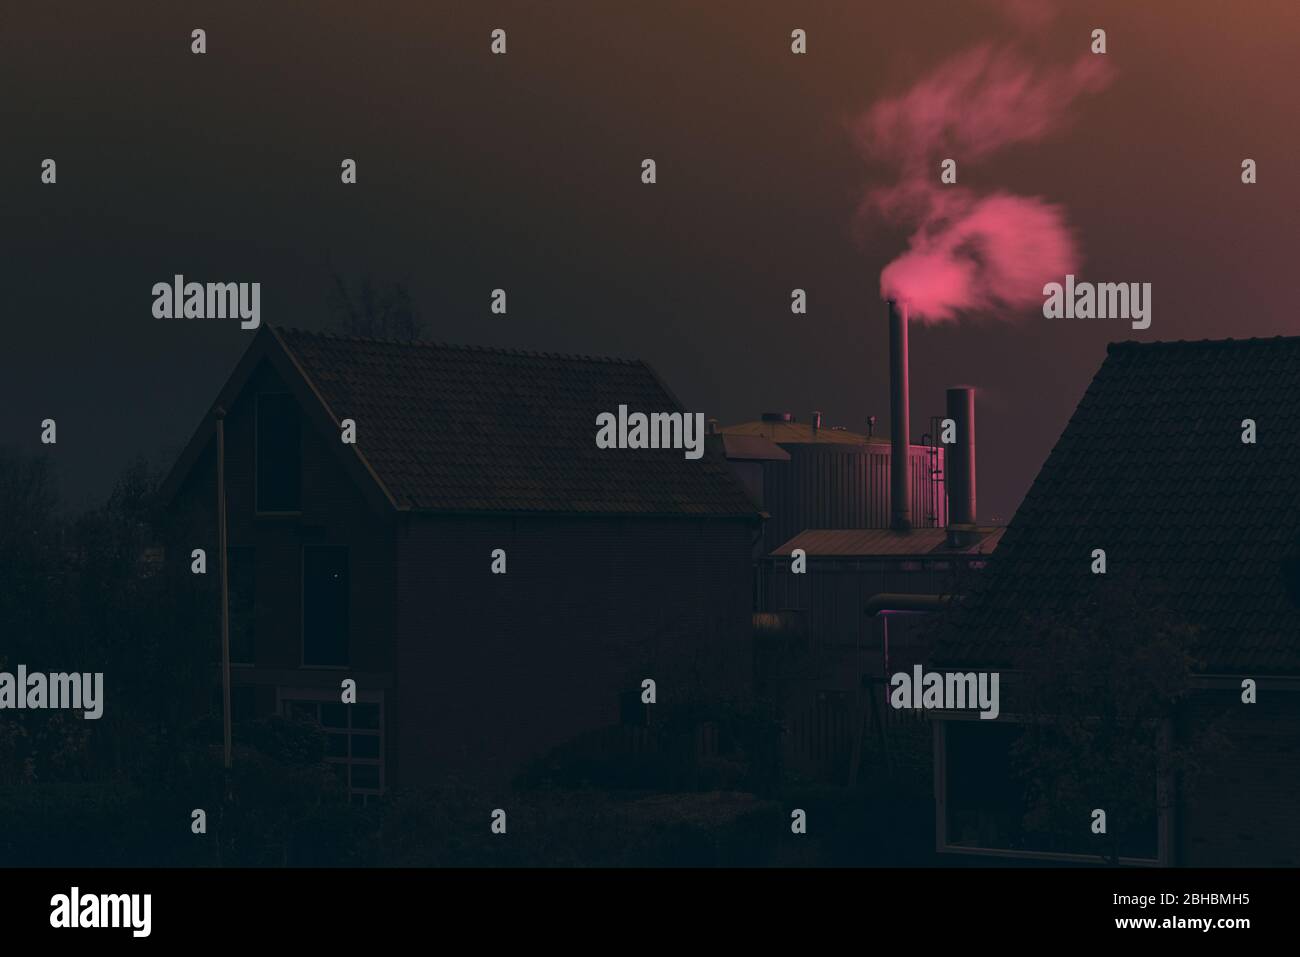 Pink smoke over roofs during night time. Pink Orange color by illumination of greenhouses. Light pollution in The Netherlands. Stock Photo